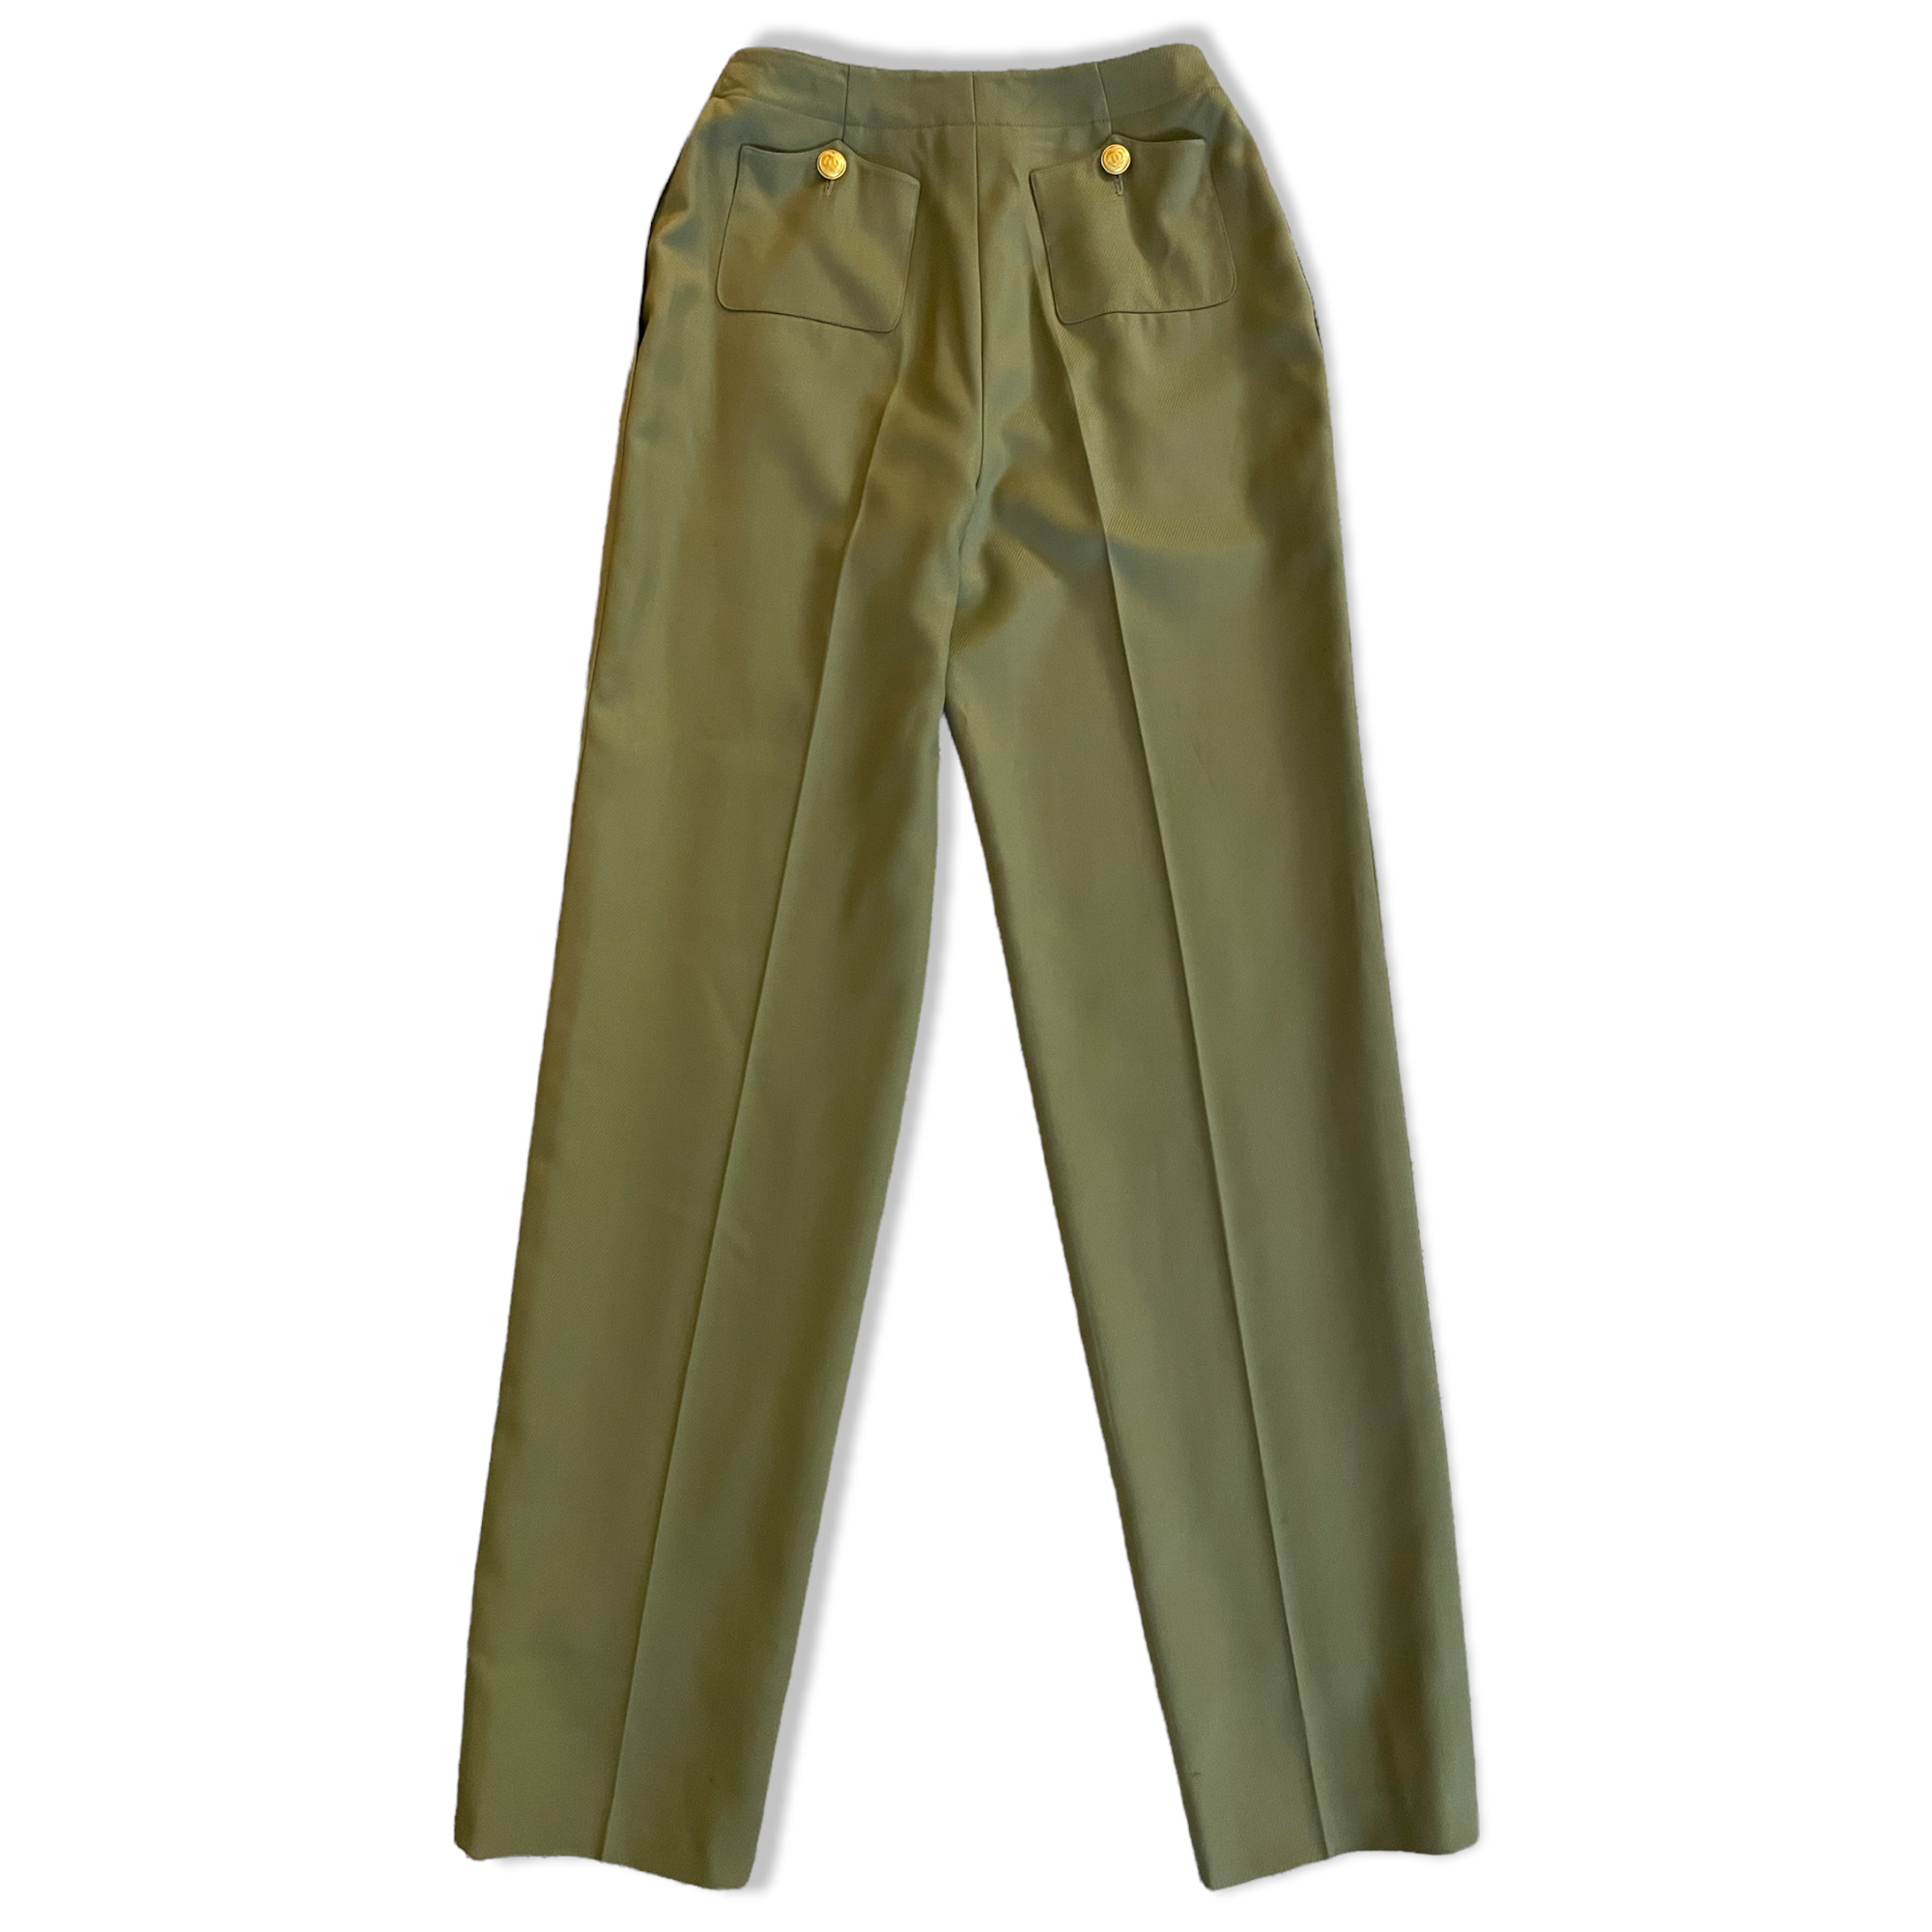 VINTAGE CHANEL  Women’s Military Green Stunning High-Waisted Wool & Silk Tailored Pants |Size: EU36|